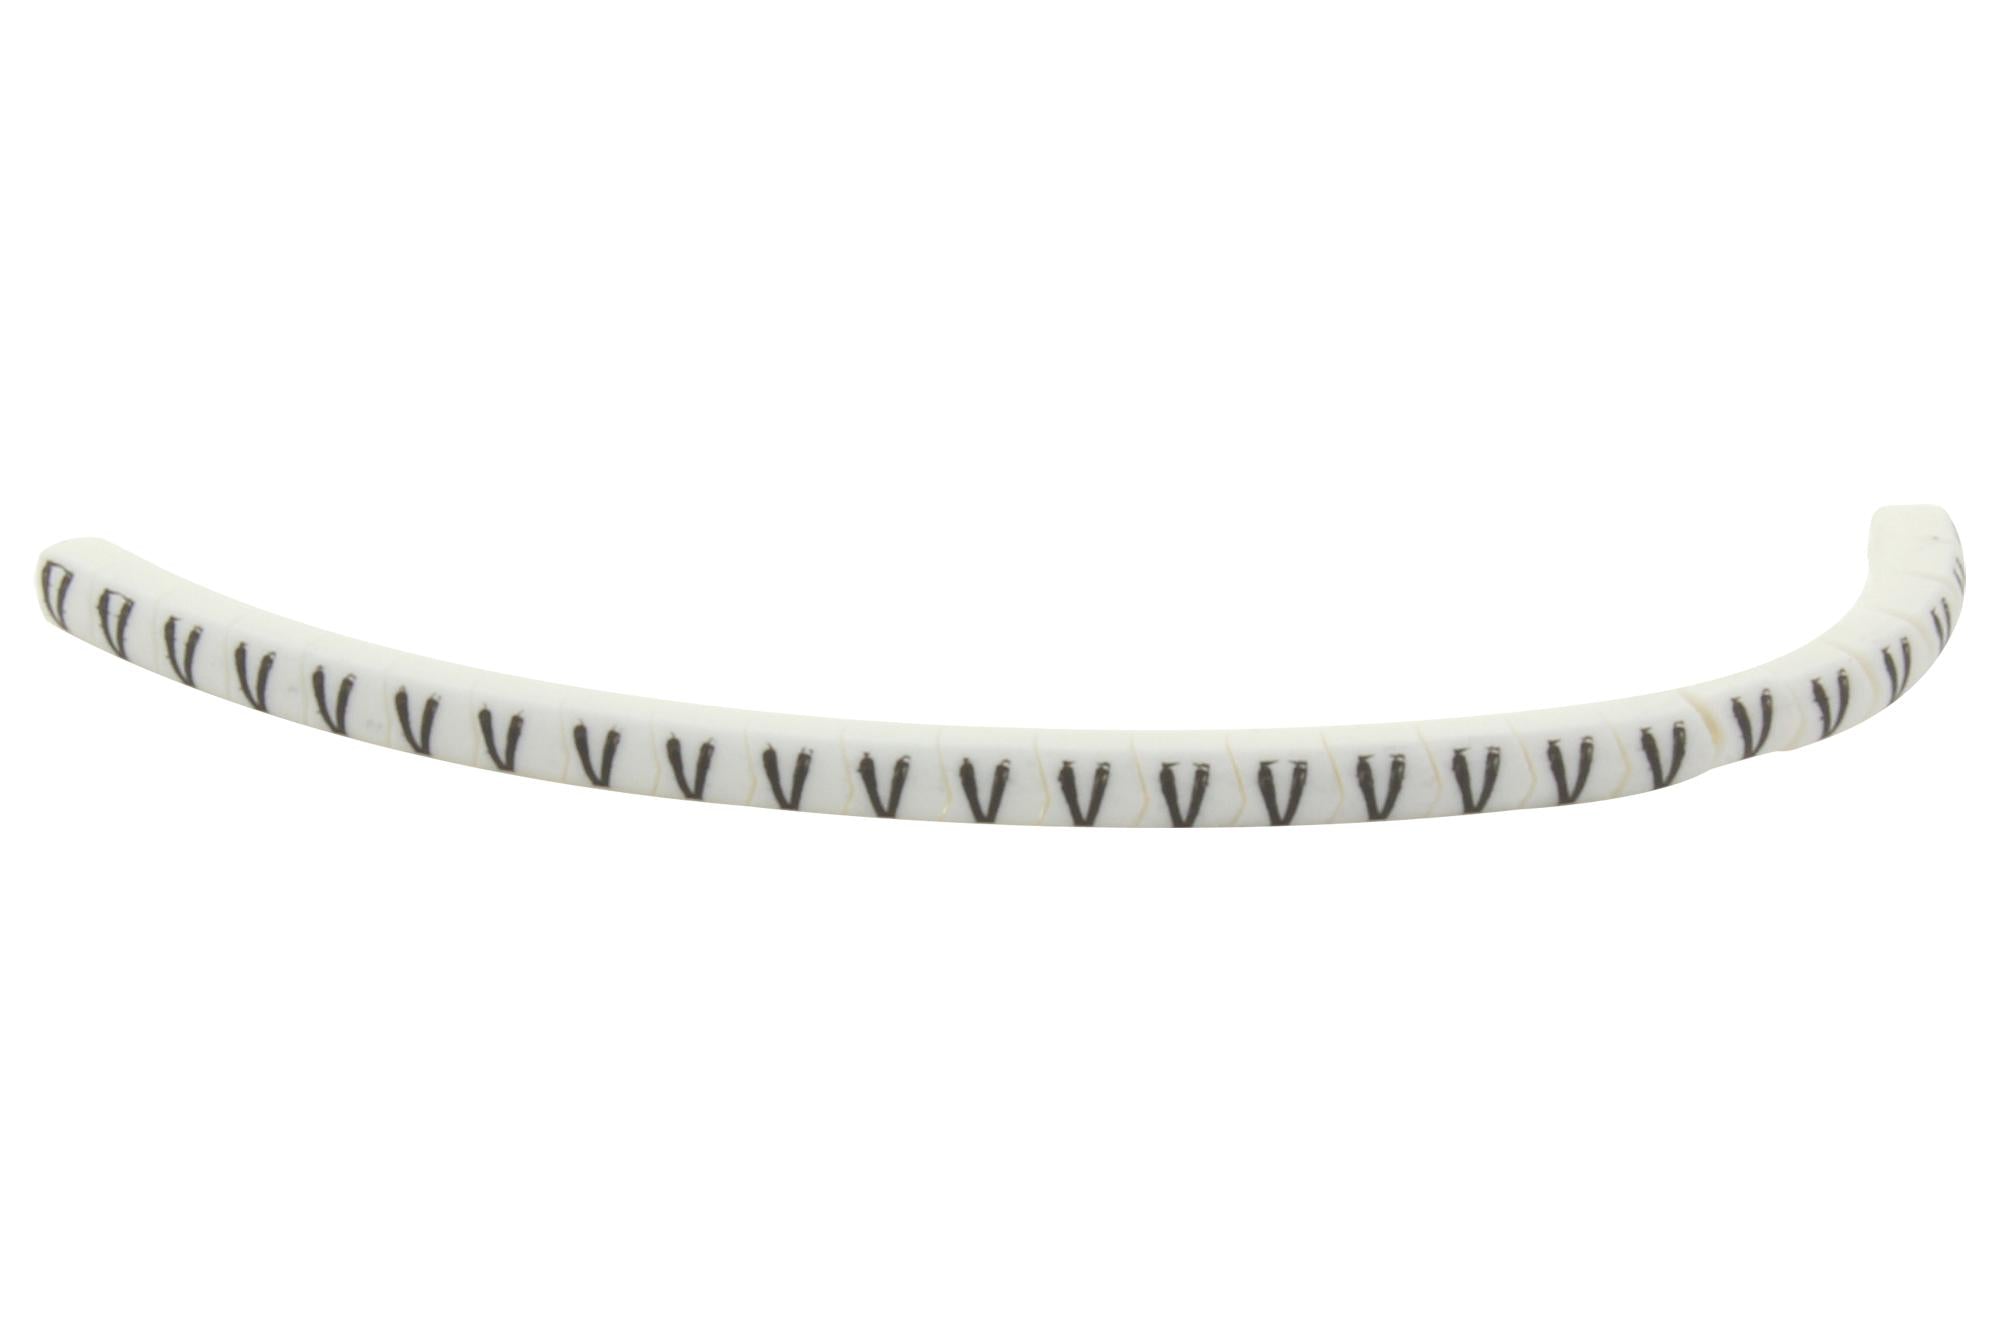 901-11045 CABLE MARKER, PRE PRINTED, PVC, WHITE HELLERMANNTYTON